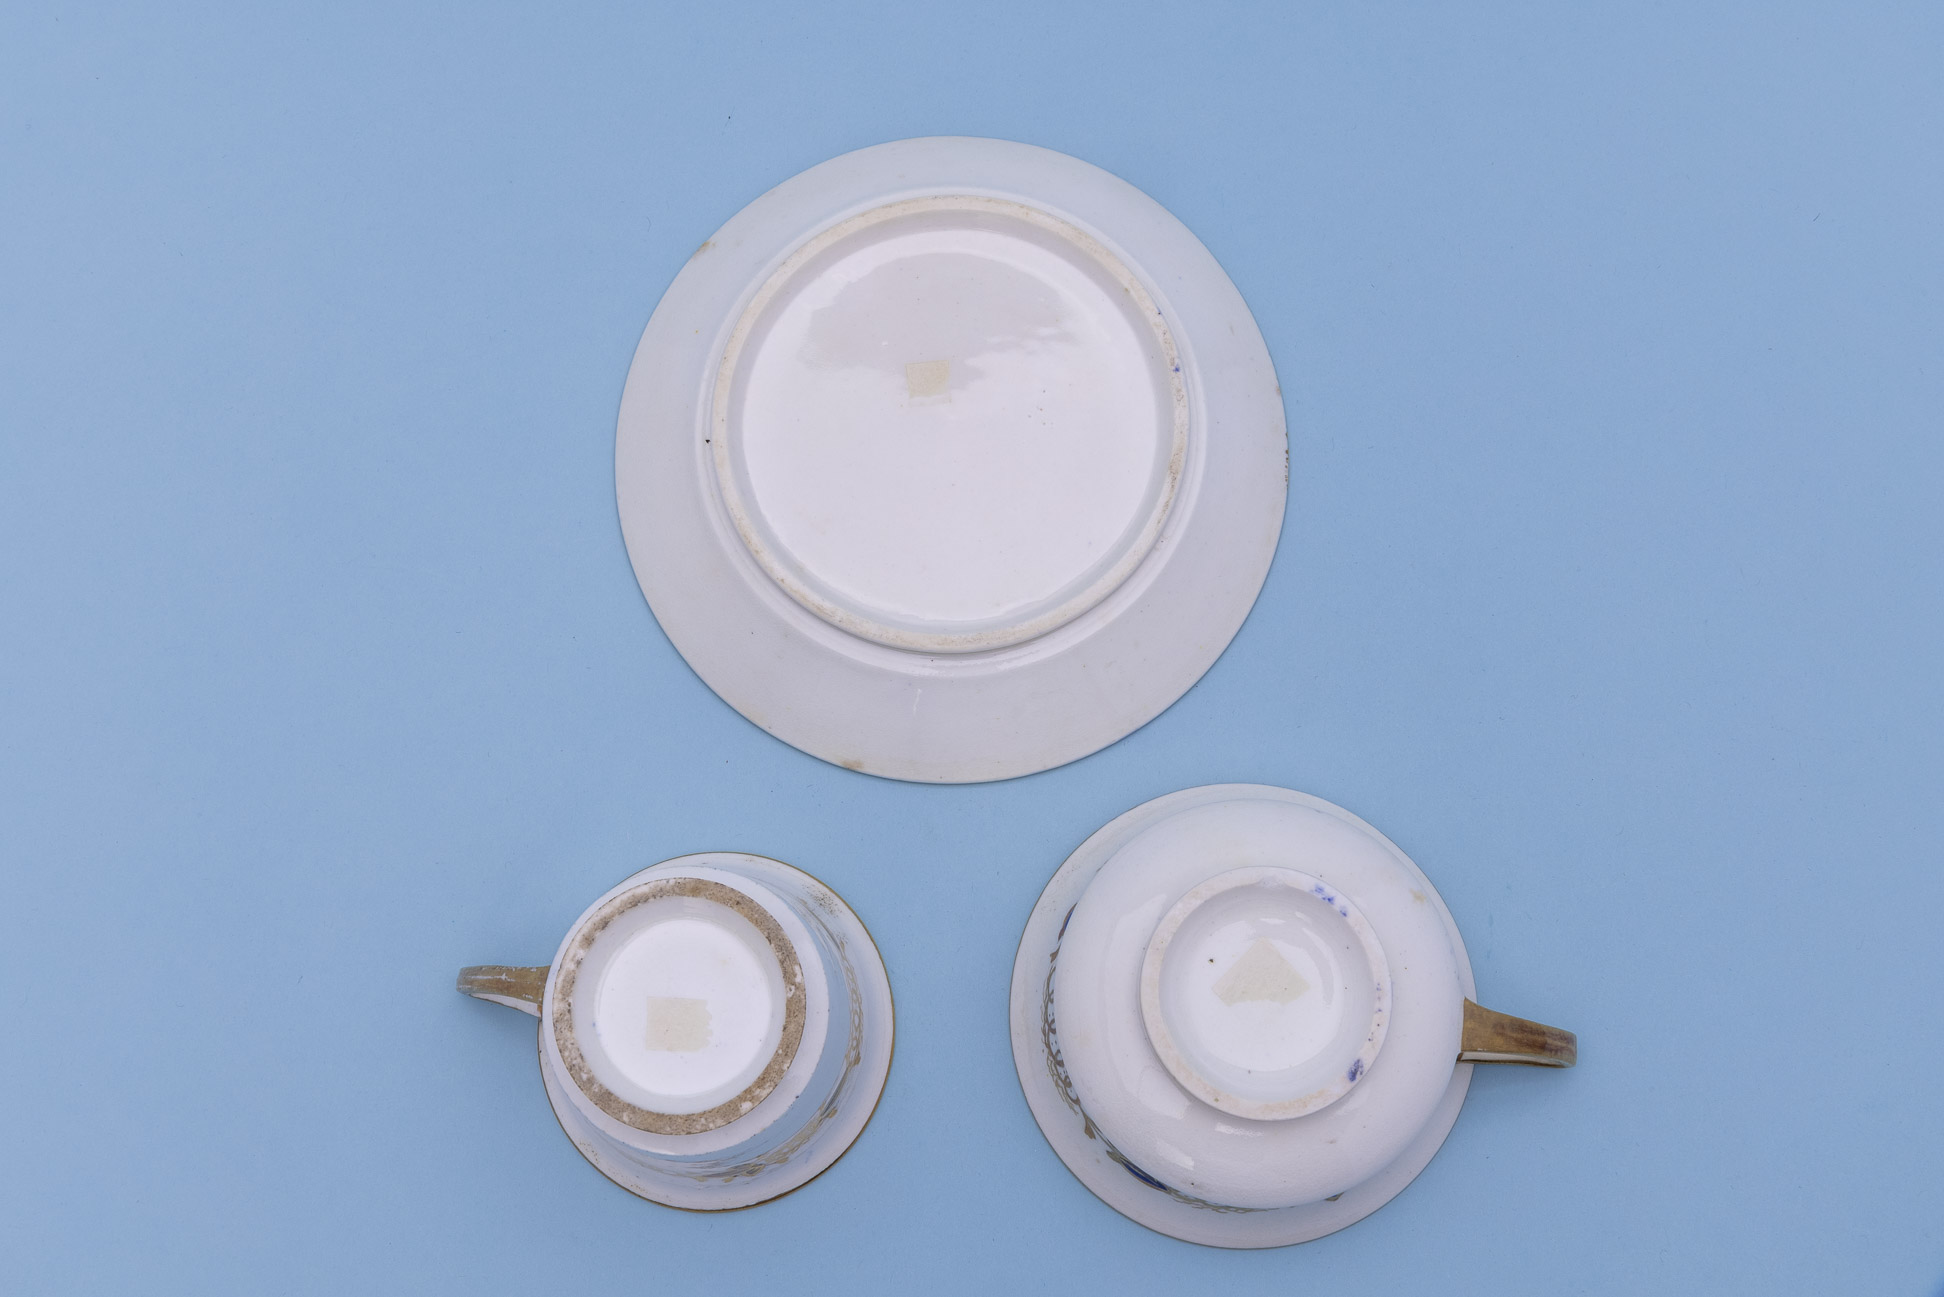 TWO SIMILAR TEA CUPS AND SAUCERS - Image 6 of 6